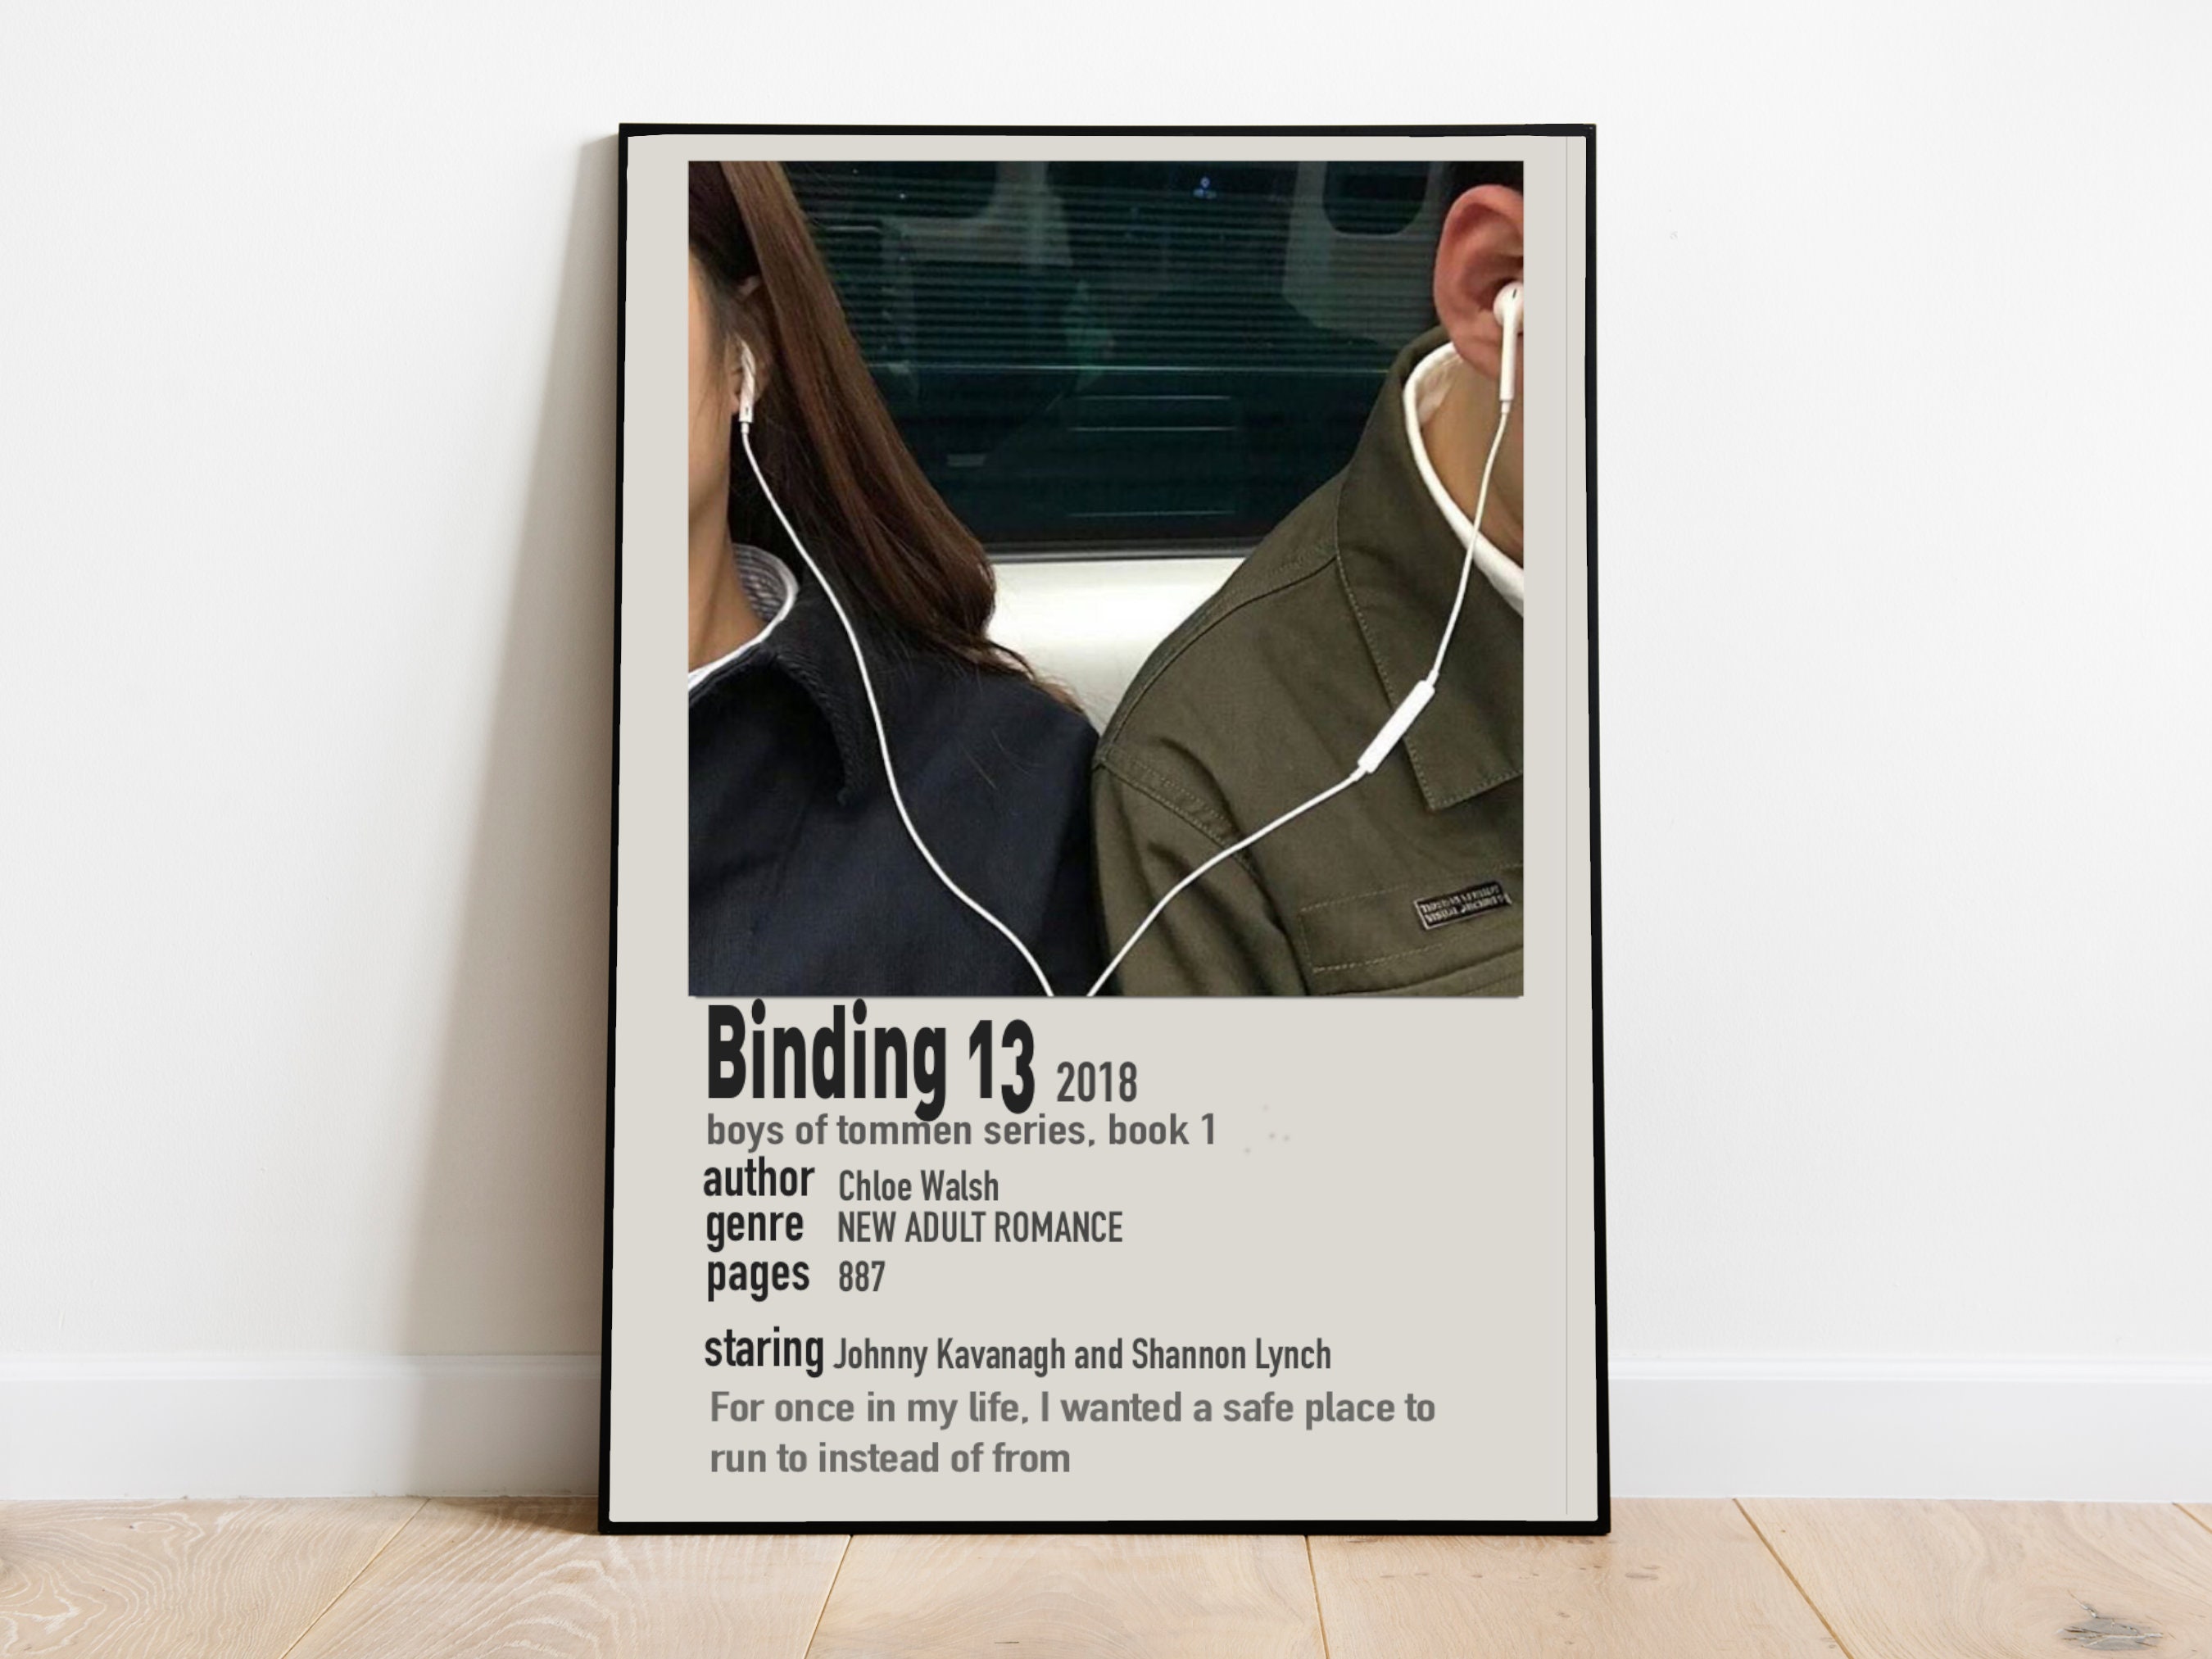 binding 13 polaroid book poster  Book posters, Books for teens, Book  boyfriends